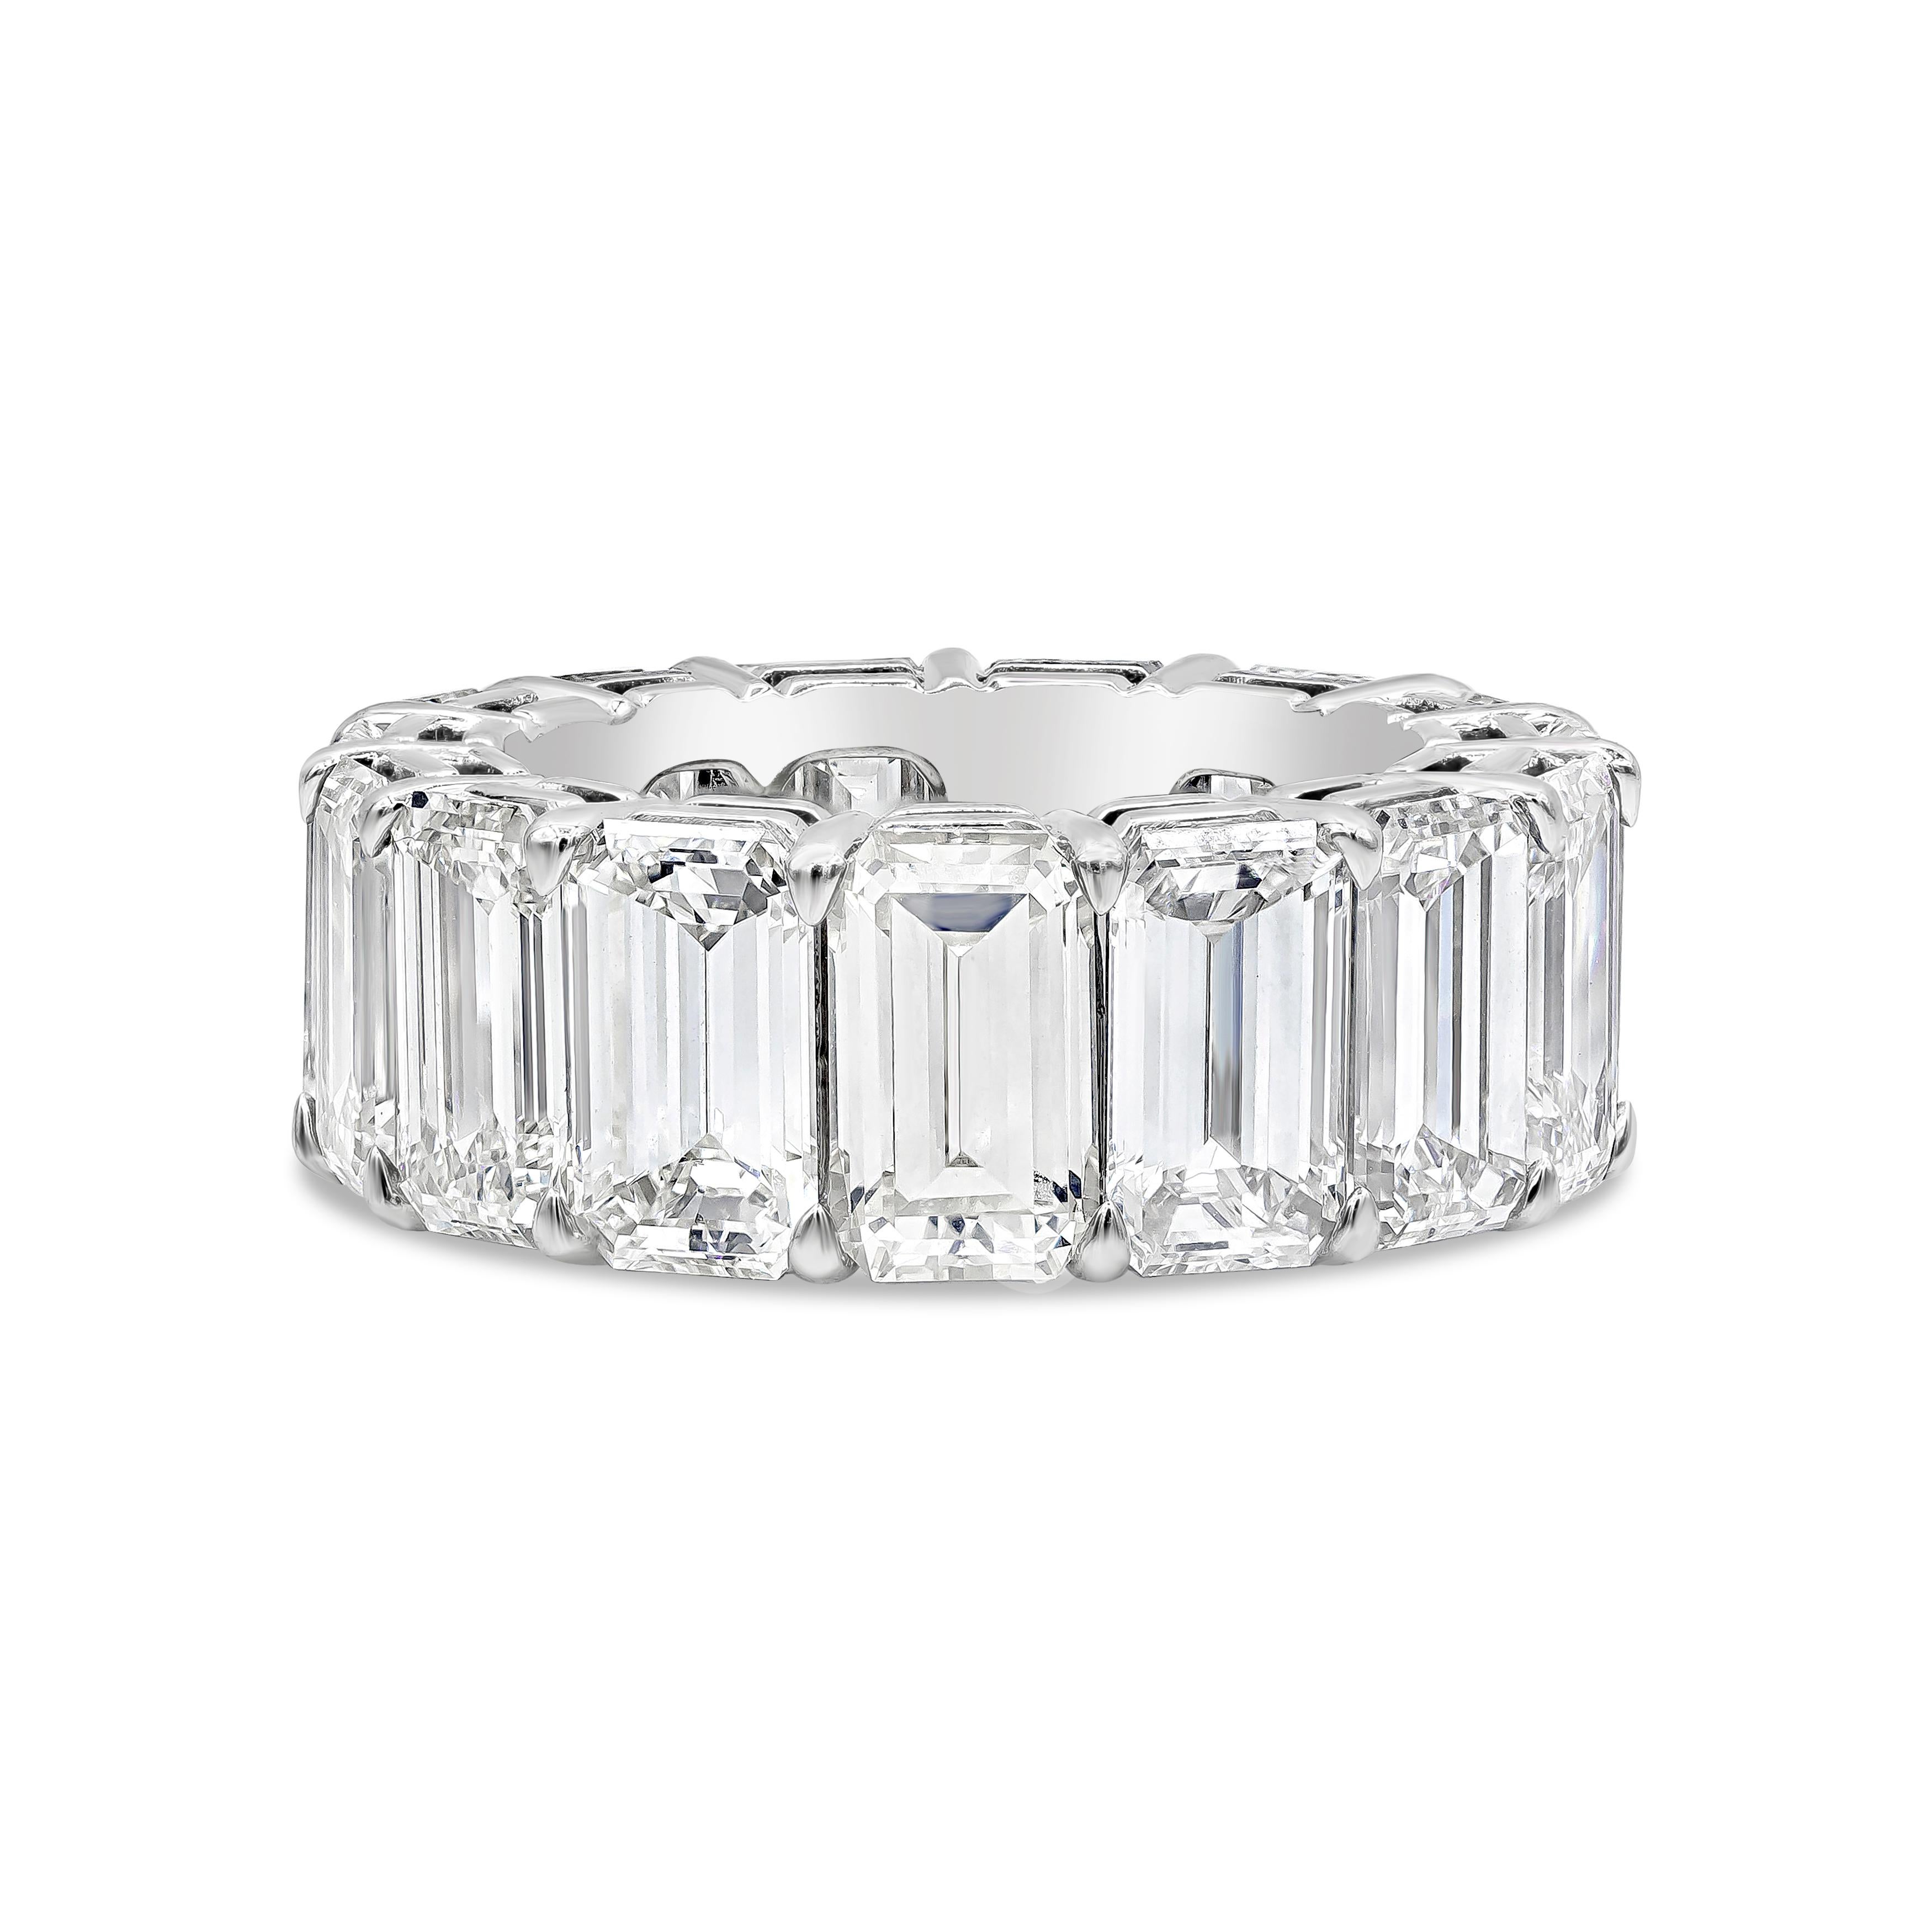 A classic wedding band, showcasing a row of emerald cut diamonds weighing 17.83 carats total, set in an open-gallery mounting made in platinum. Four diamonds accompanied with a GIA report. Diamonds are approximately I-J color, VS clarity and 8.30mm